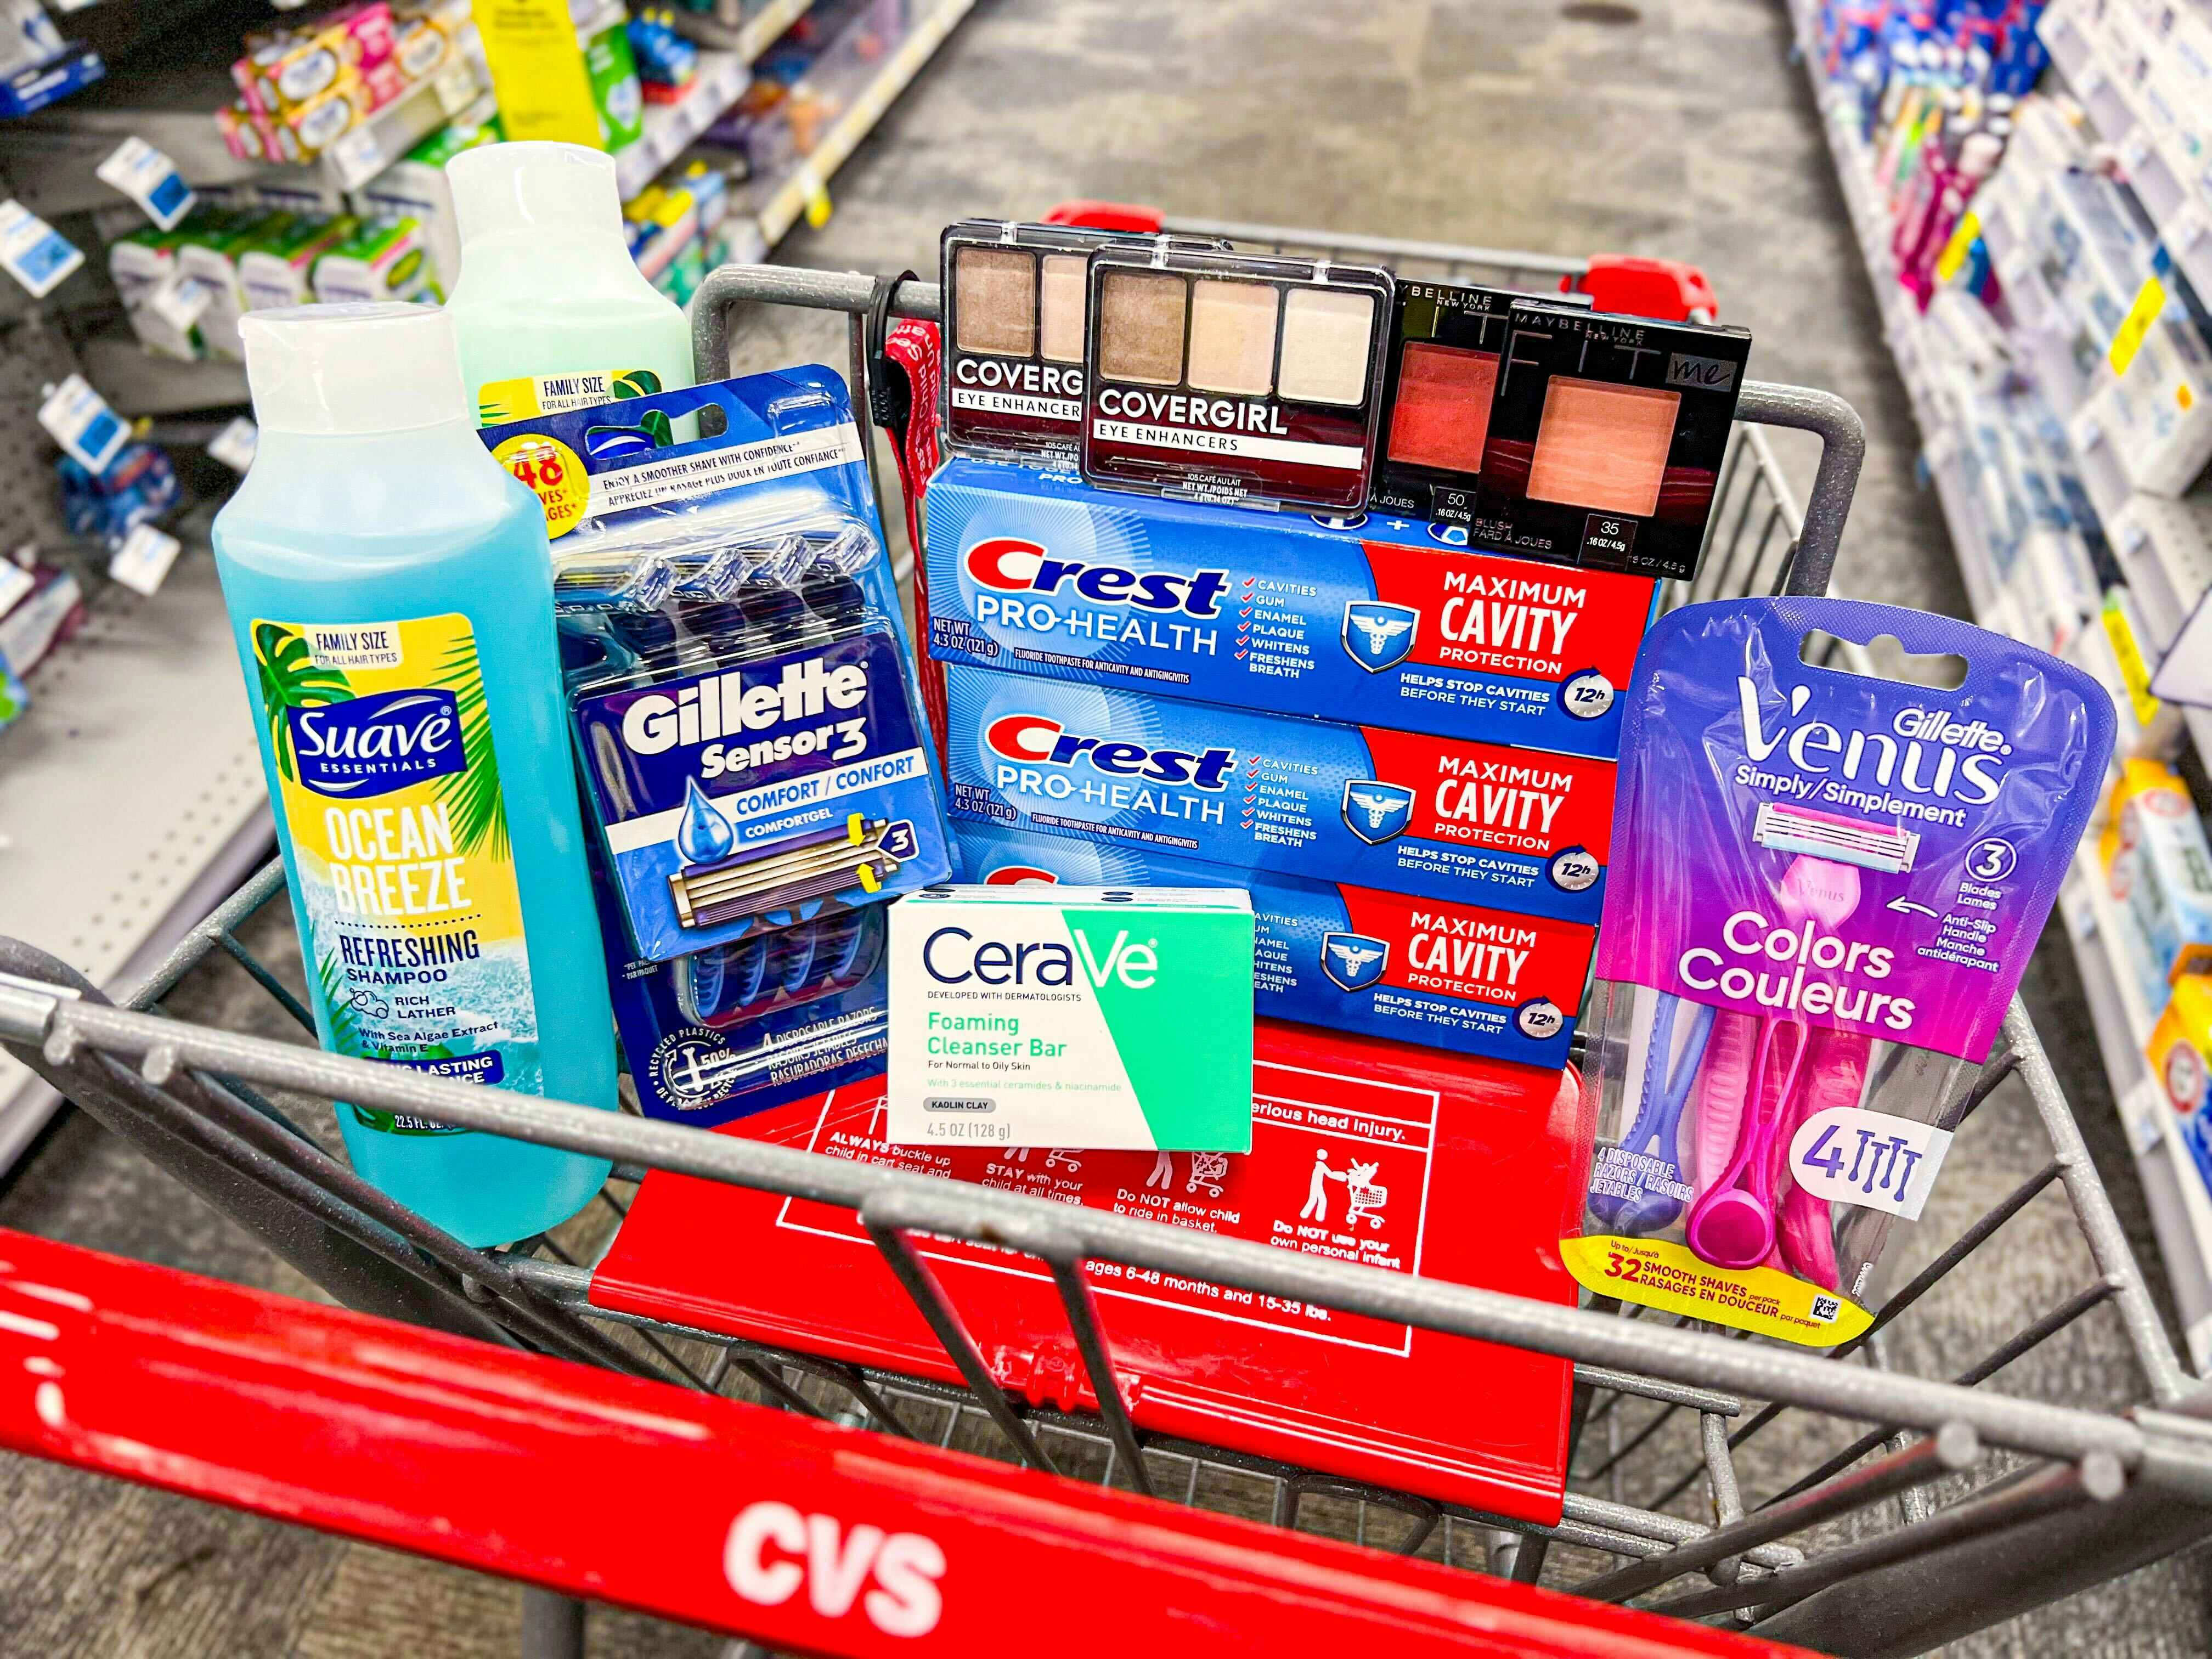 Score 12 Freebies With This CVS Shopping Haul: Cerave, Gillette, and More